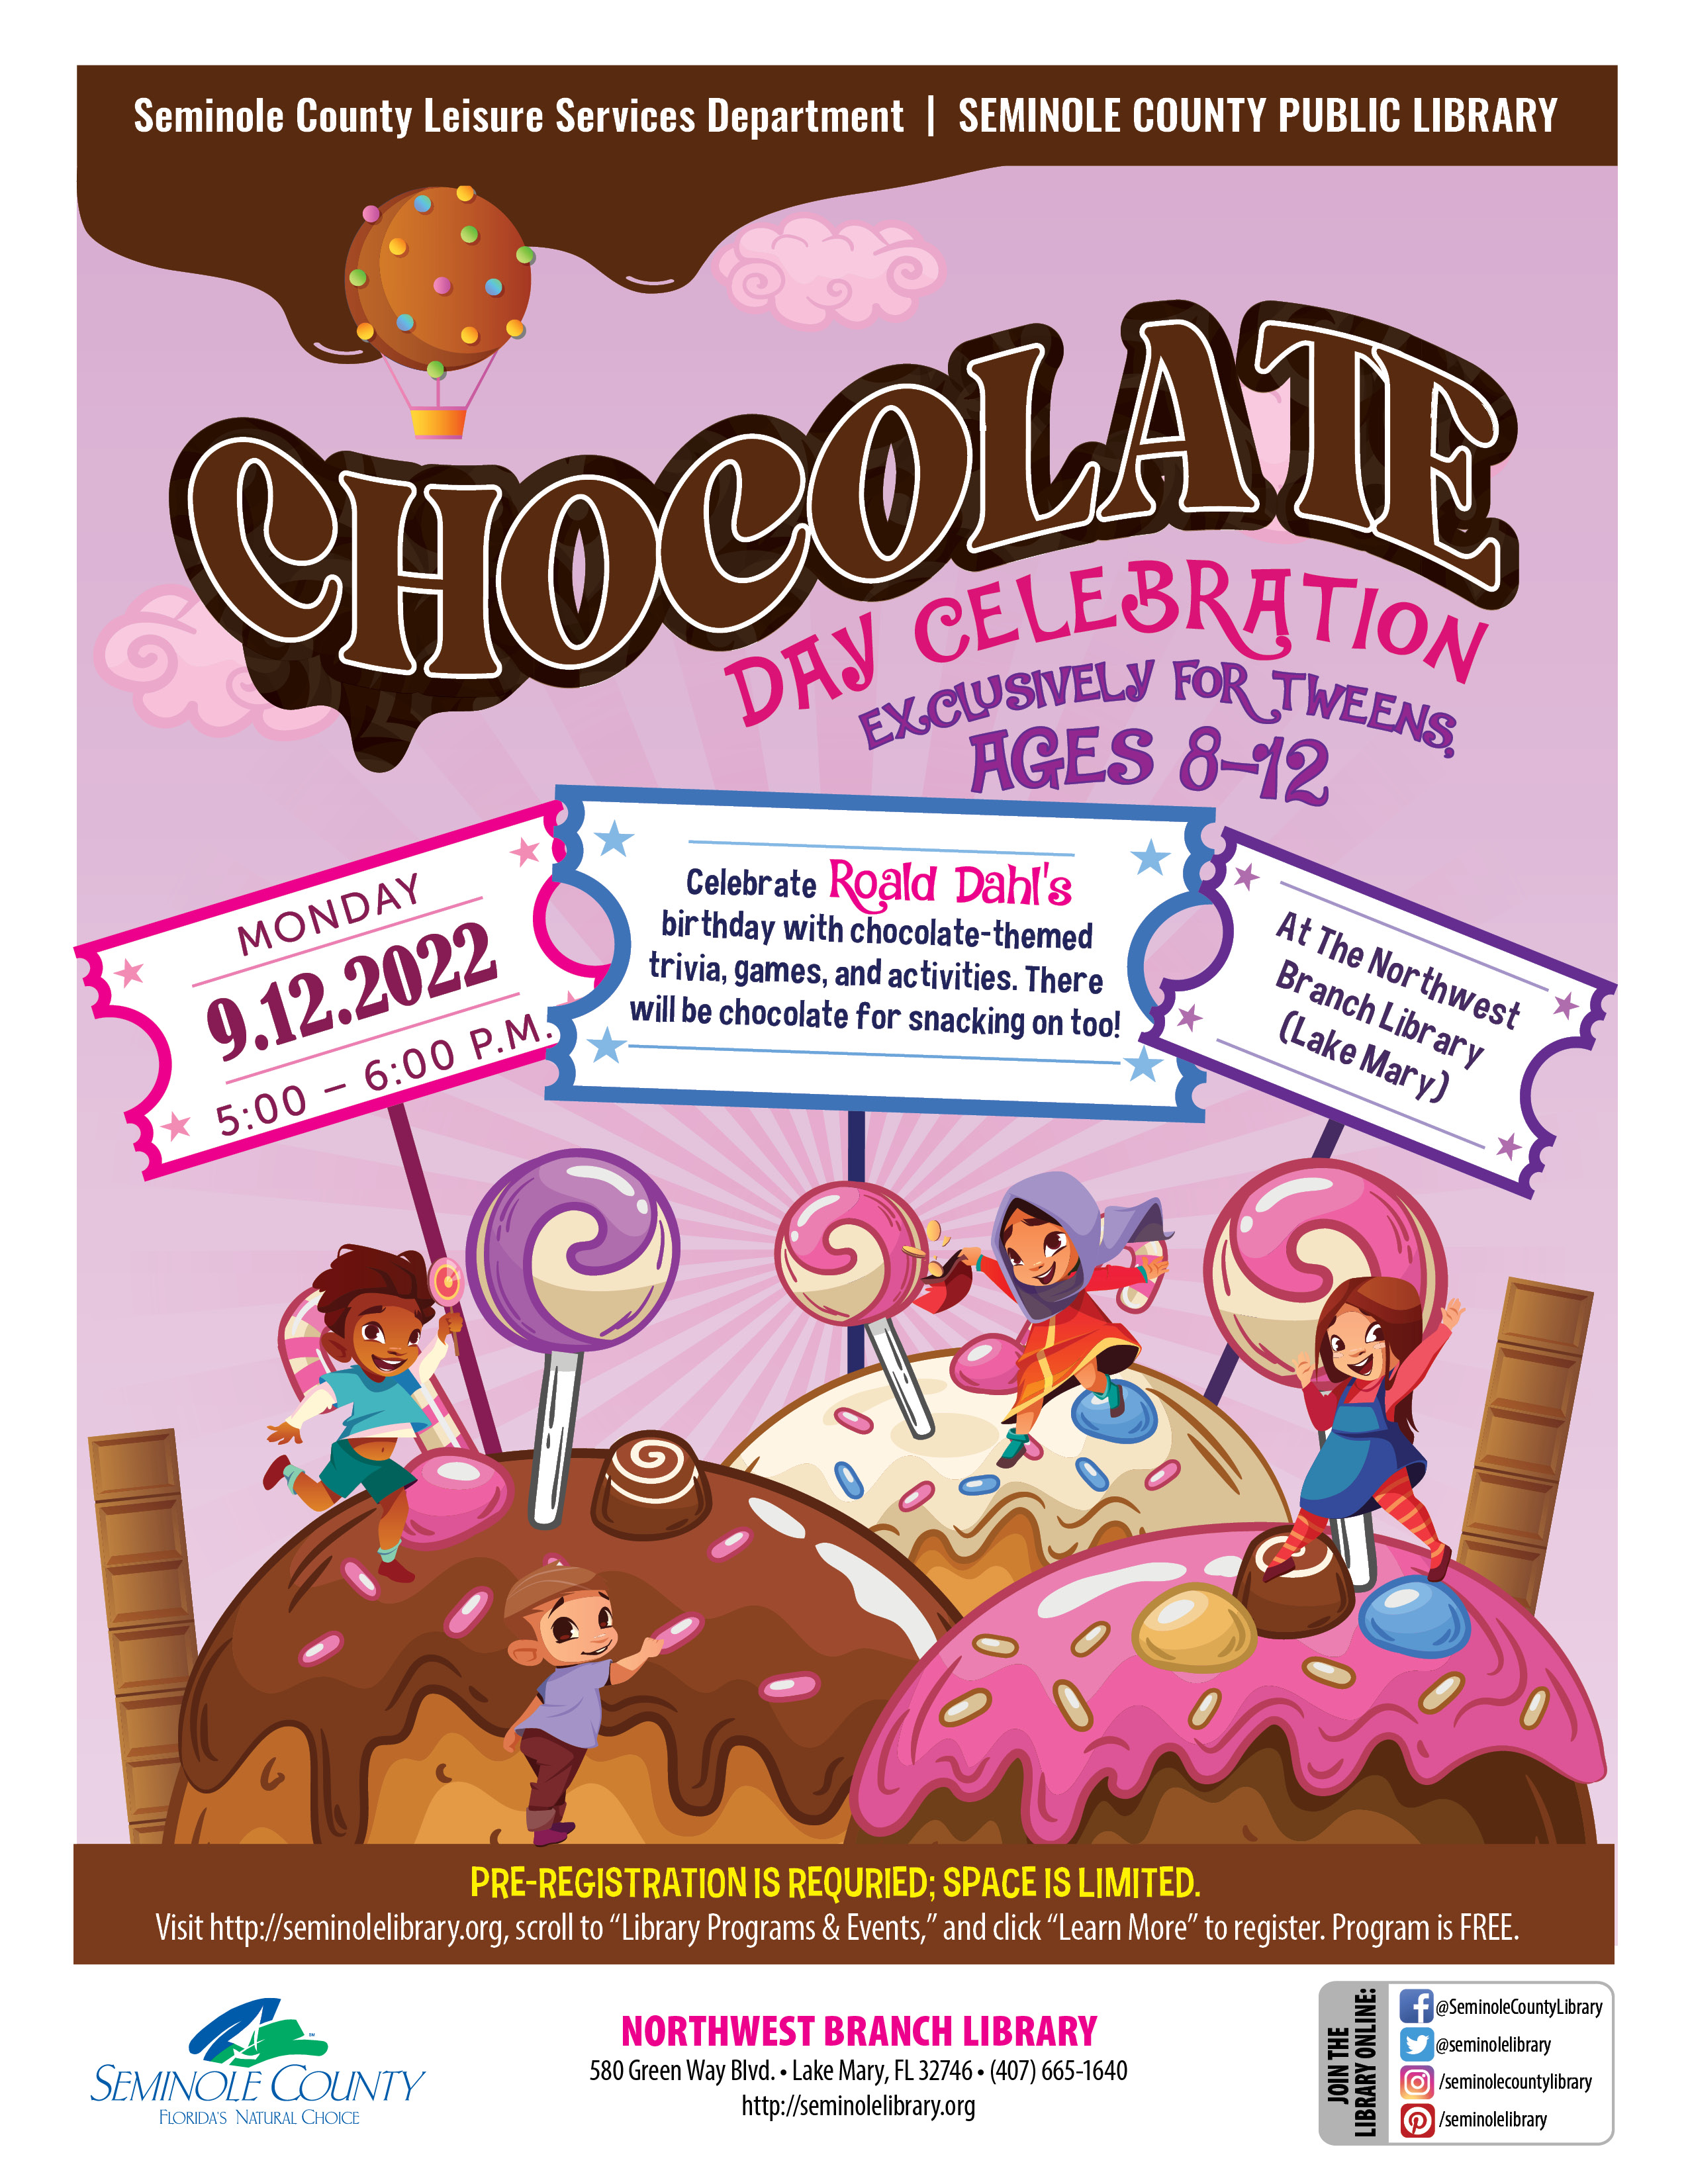 Chocolate Day Celebration for Tweens - Northwest Branch Library